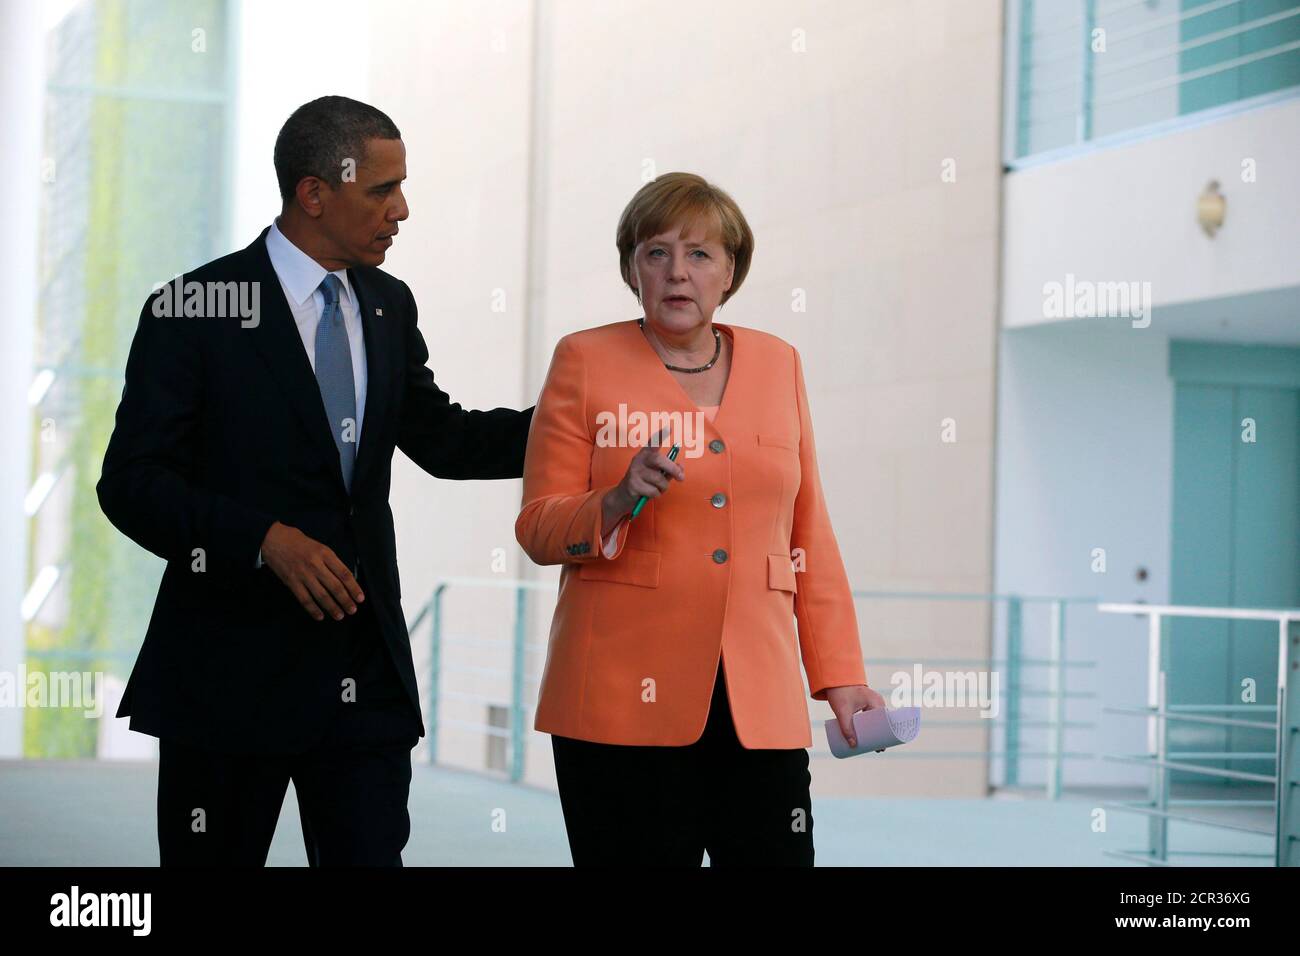 U.S. President Barack Obama and German Chancellor Angela Merkel (R) make their way to a news conference at the Chancellery in Berlin June 19, 2013. Obama will unveil plans for a sharp reduction in nuclear warheads in a landmark speech at the Brandenburg Gate on Wednesday that comes 50 years after John F. Kennedy declared 'Ich bin ein Berliner' in a defiant Cold War address.        REUTERS/Thomas Peter (GERMANY  - Tags: POLITICS) Stock Photo